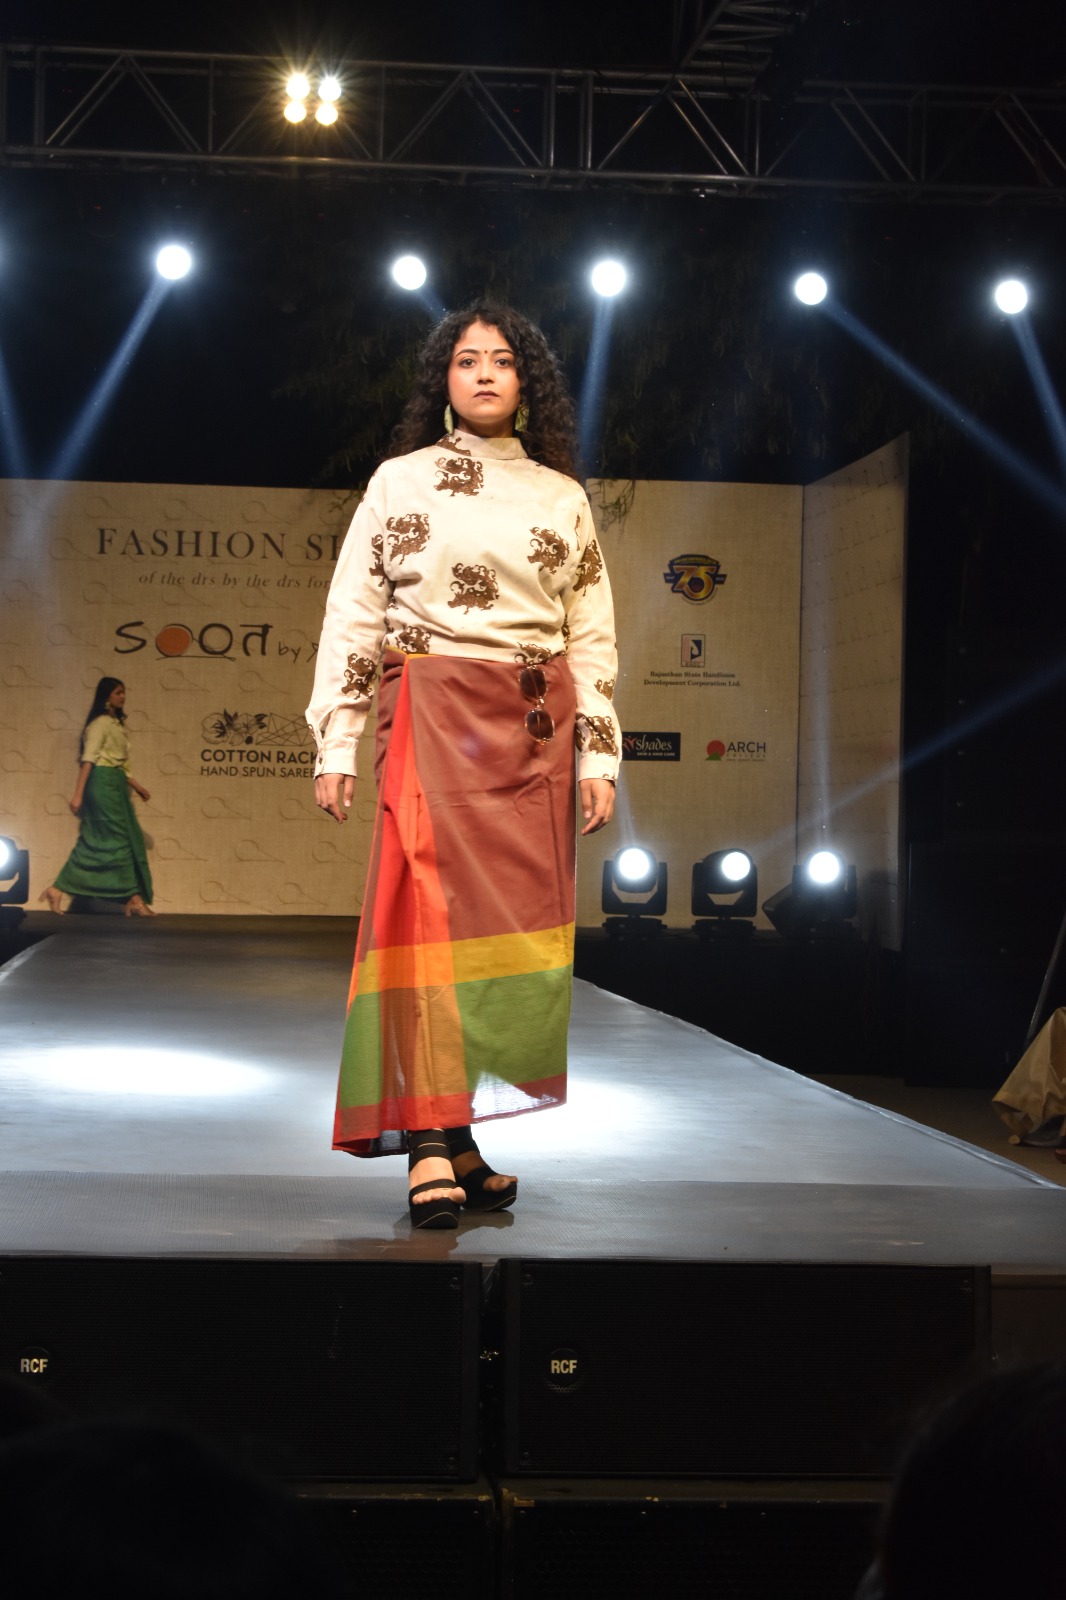 FIRST EVER DOCTORS’FASHION SHOW SHOWCASES STYLISH YET FUNCTIONAL APPAREL FOR DOCTORS